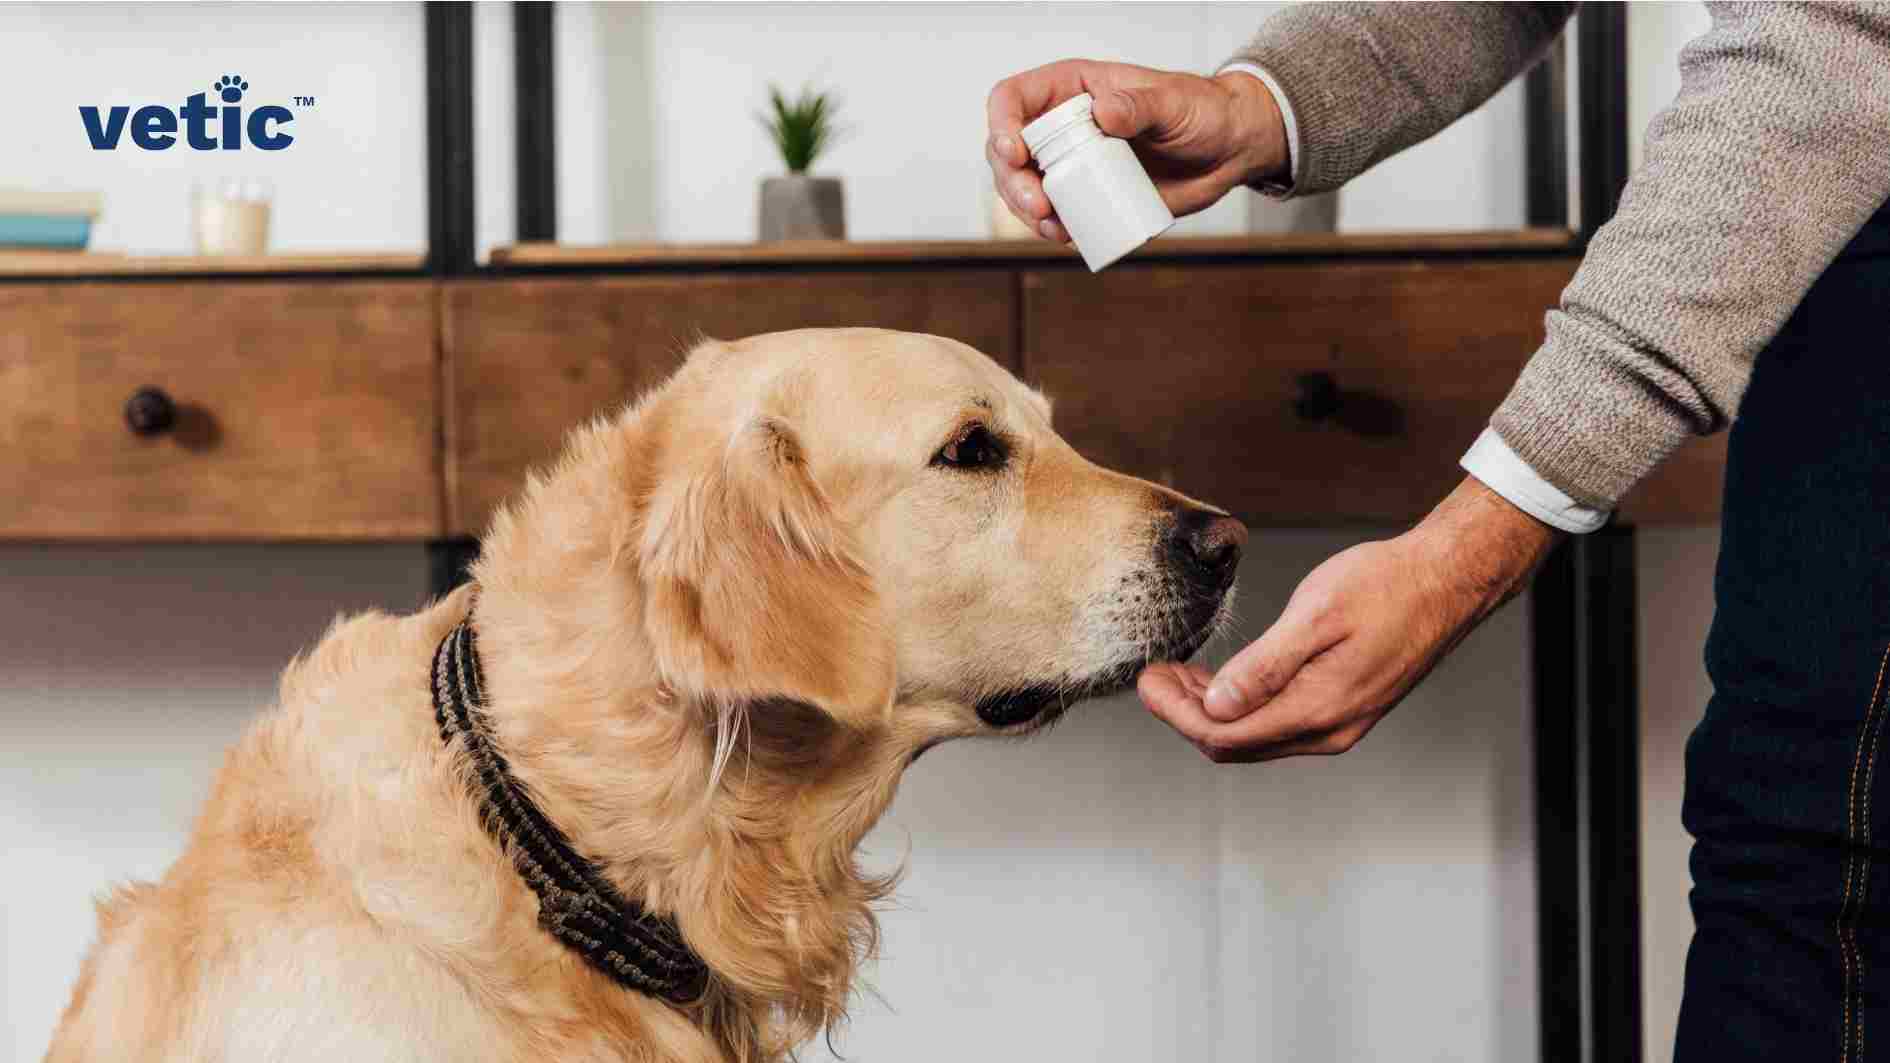 A photo of a person giving a dose of dewormer to a golden retriever, showing the importance of regular deworming for dogs. The golden retriever has a black collar and looks attentive. The person is holding a white bottle of dewormer and gently holding the dog’s muzzle. The background is plain and white, with a wooden cabinet and a potted plant. The logo “vetic™” is in the upper left corner of the image. A person administering dewormer to a golden retriever with a black collar. Choosing the right dewormers for your dog can be easy if you know the compositions of the meds and what parasites they act on.